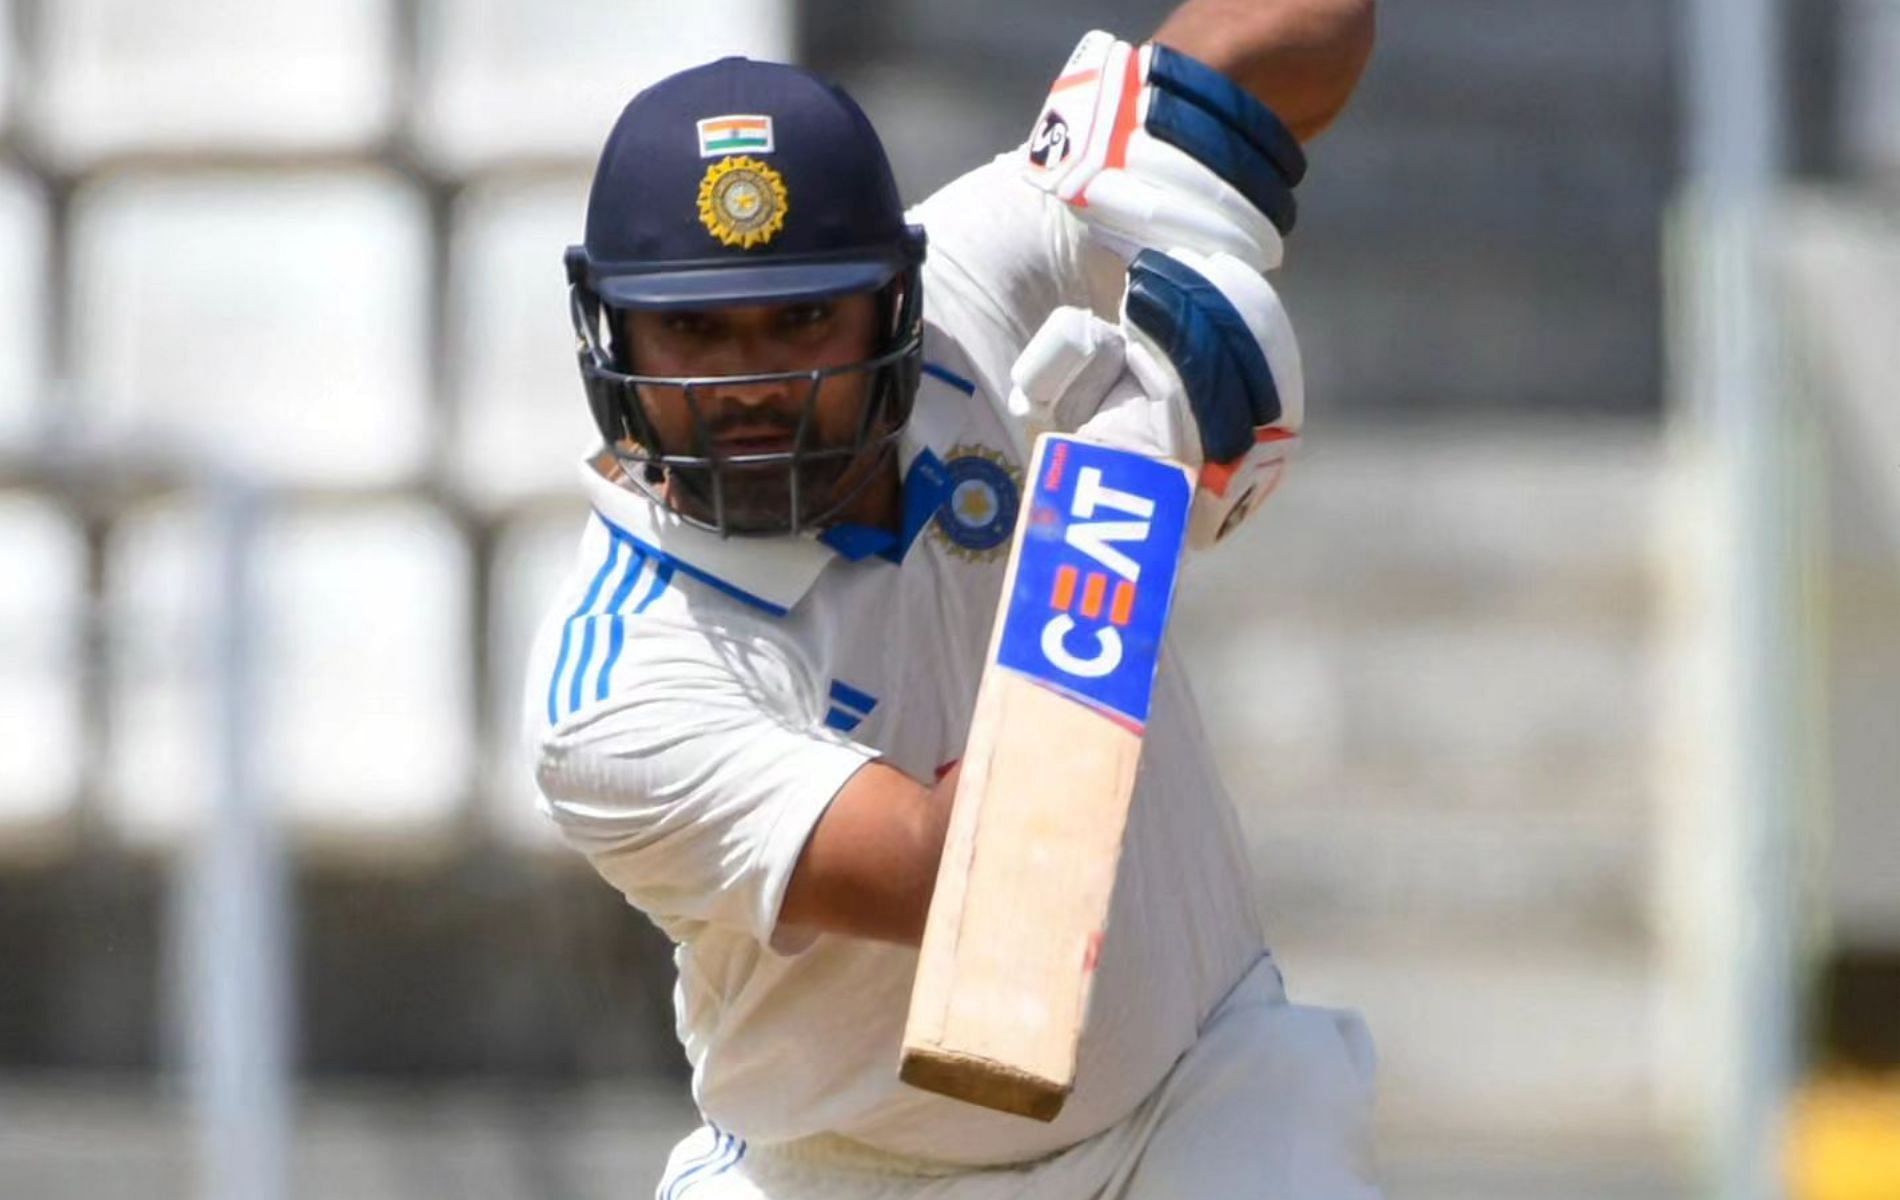 Rohit Sharma in action. (Pic: BCCI)